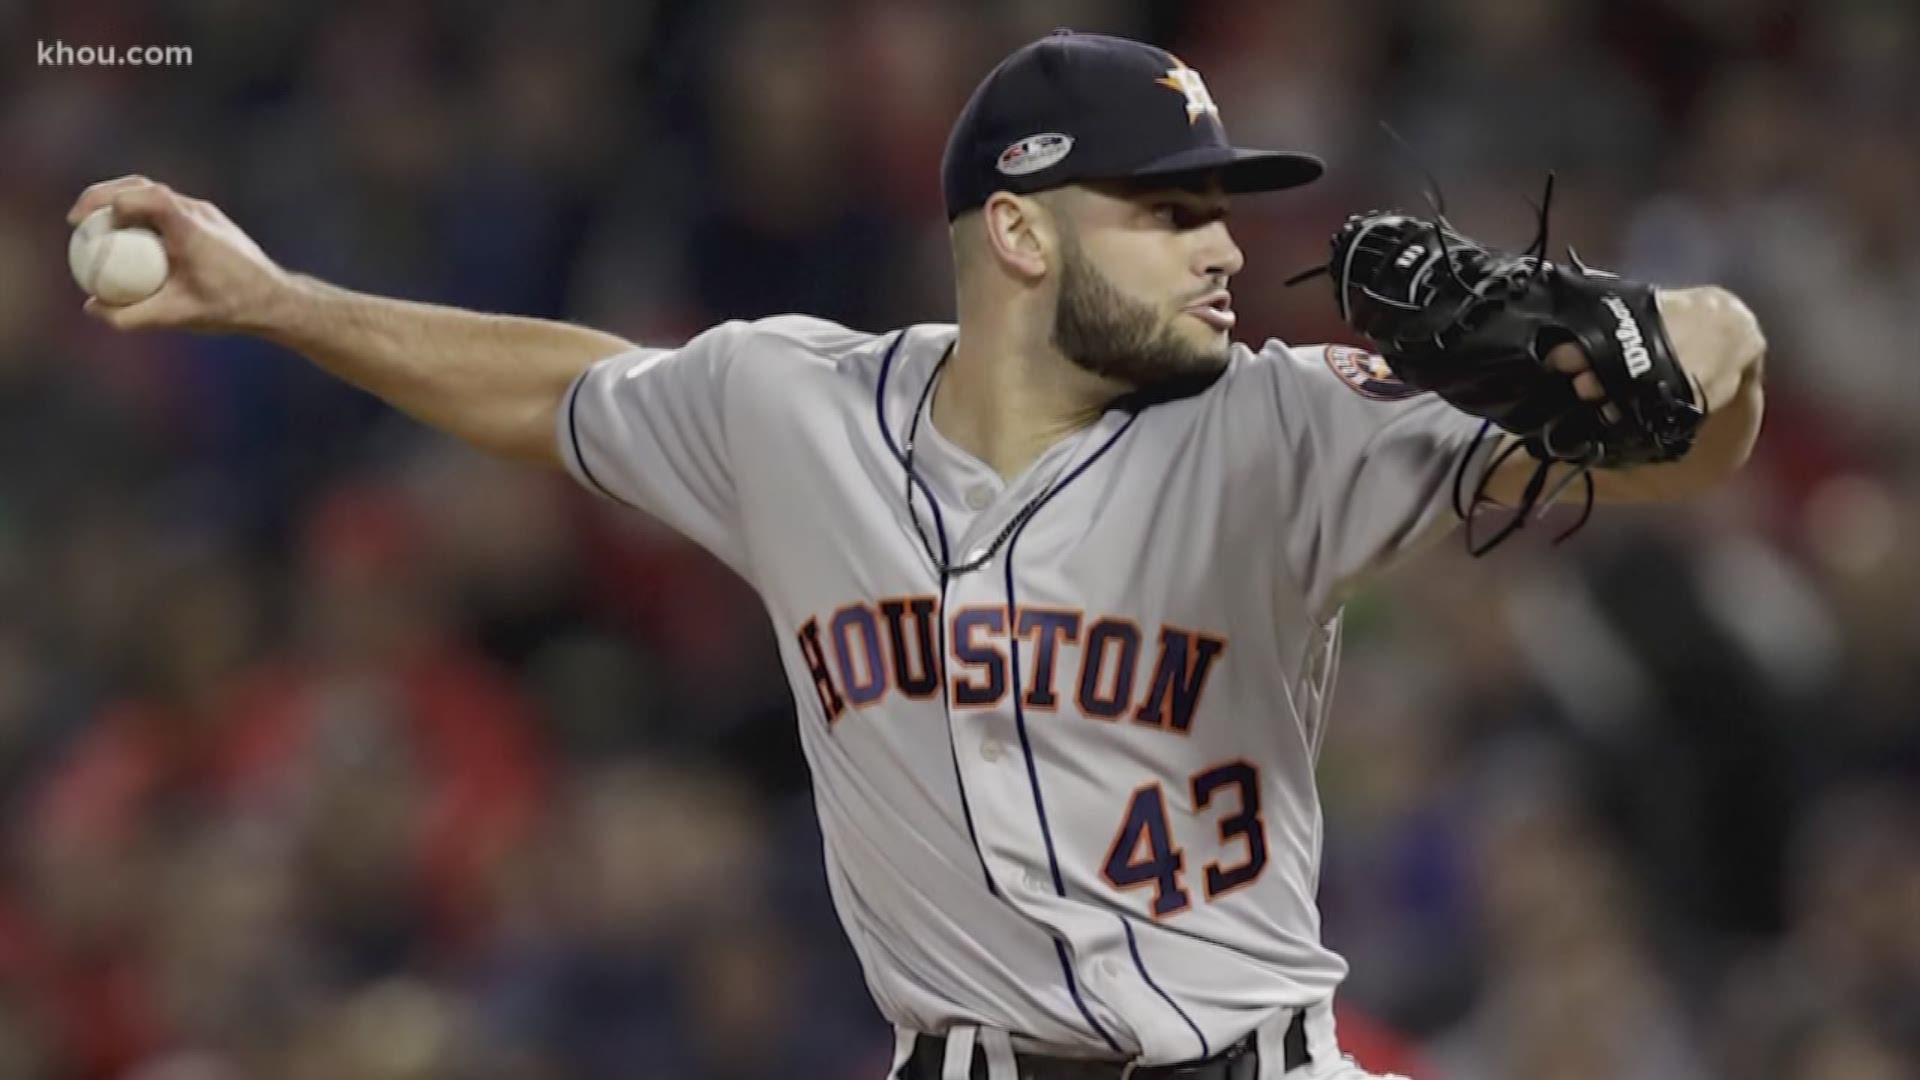 Looking to score World Series tickets? Astros pitcher Lance McCuller is having a contest to win tickets and all you have to do is donate to his foundation.